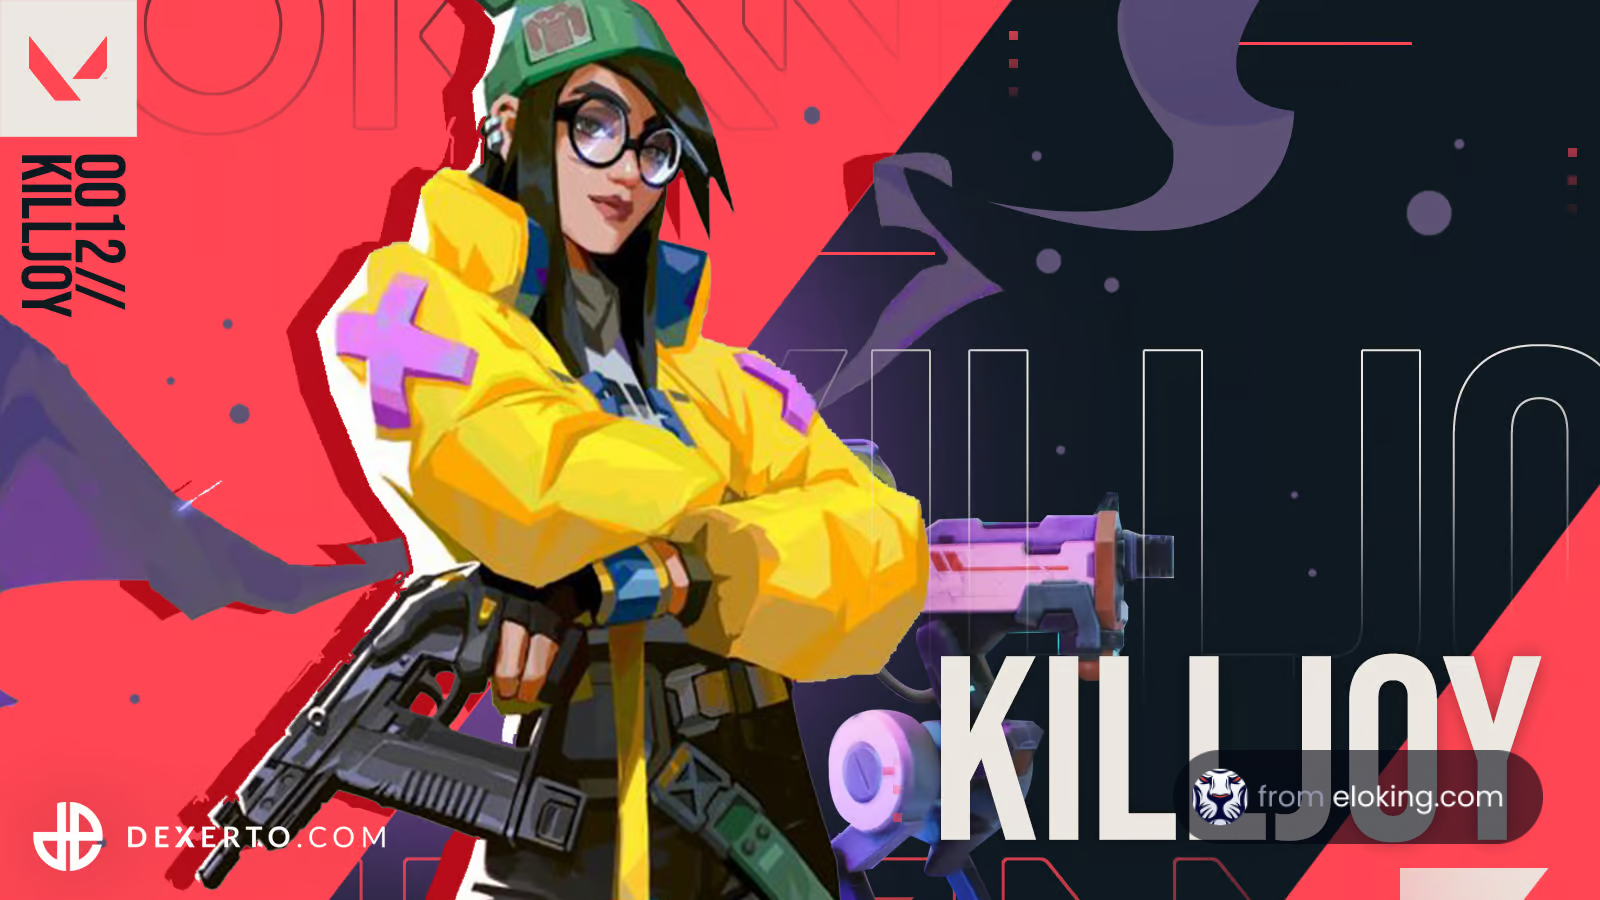 Colorful artwork of Killjoy, a character from the game Valorant, posing with a weapon against an abstract graphic background